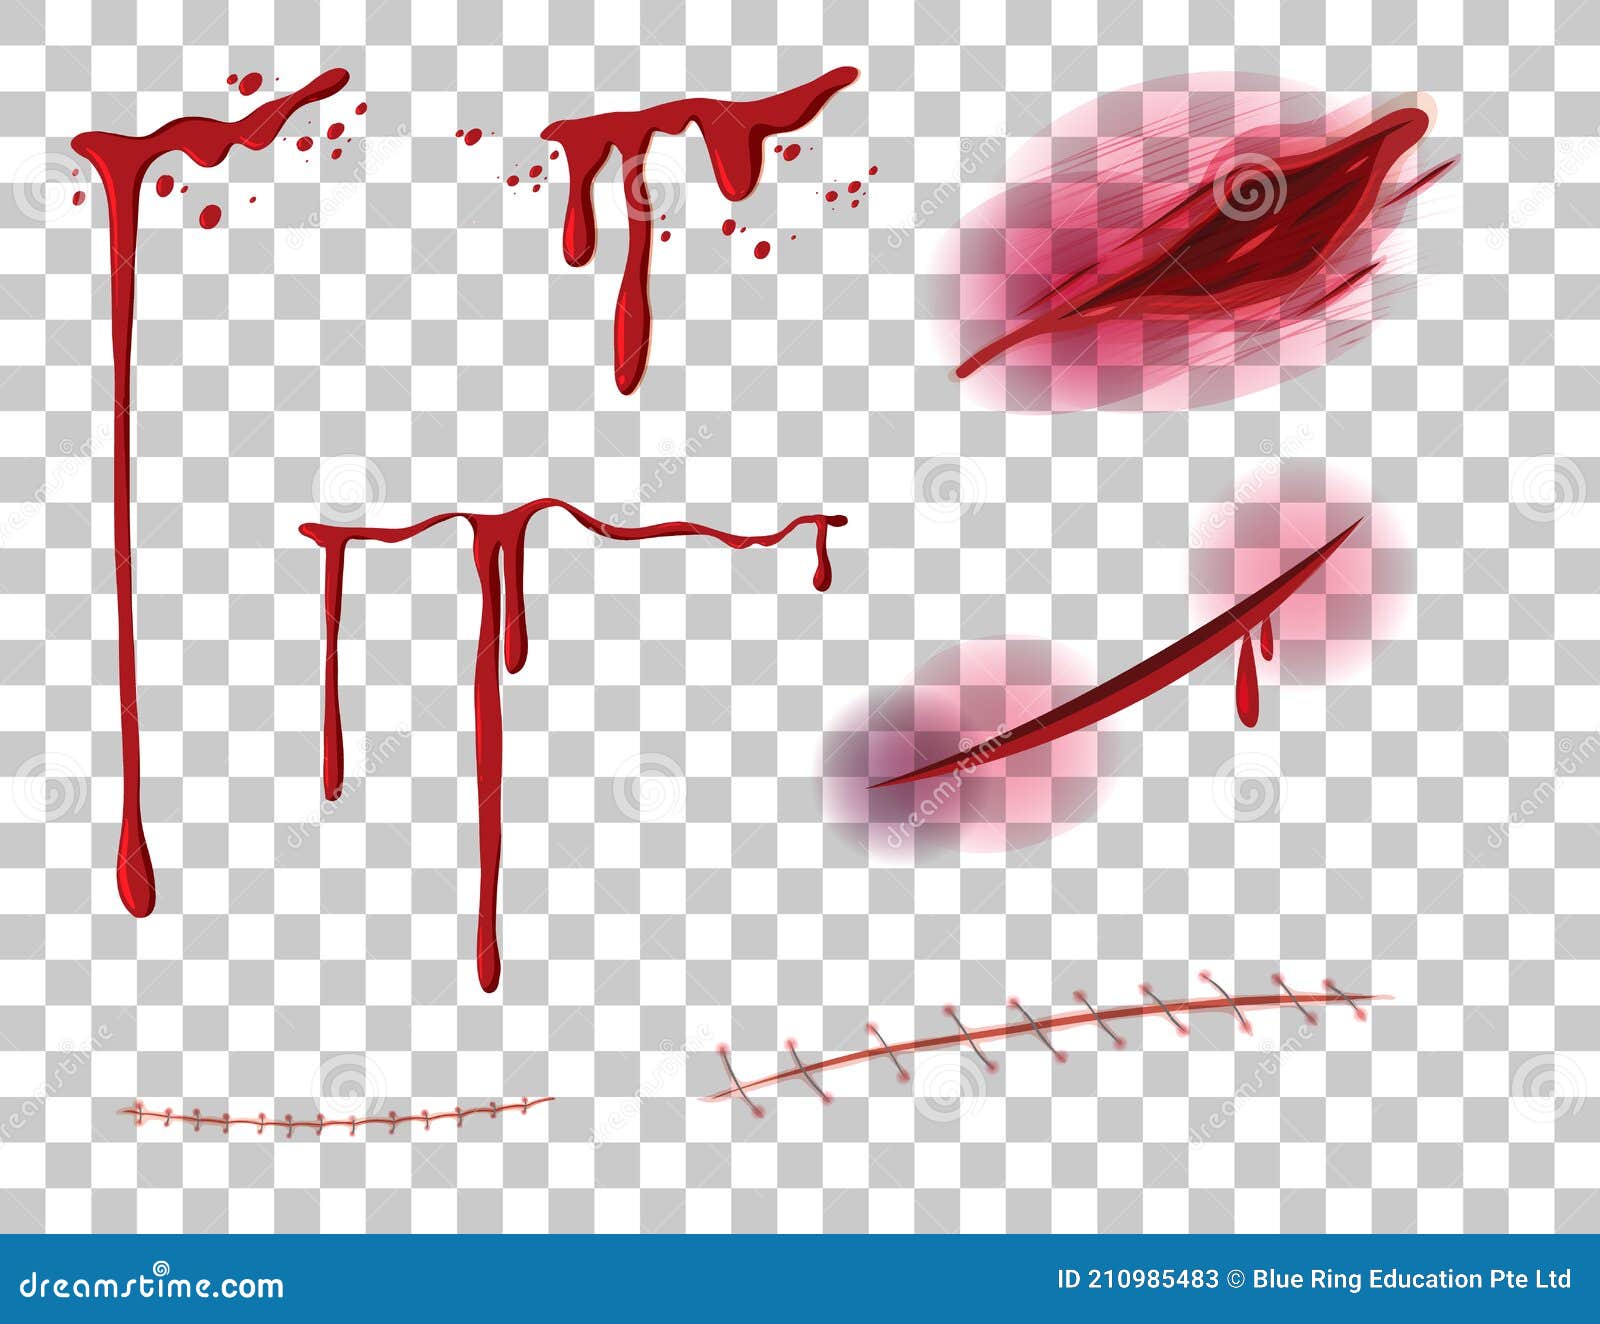 20+ Amazing Halloween blood Transparent Background Images Free Download